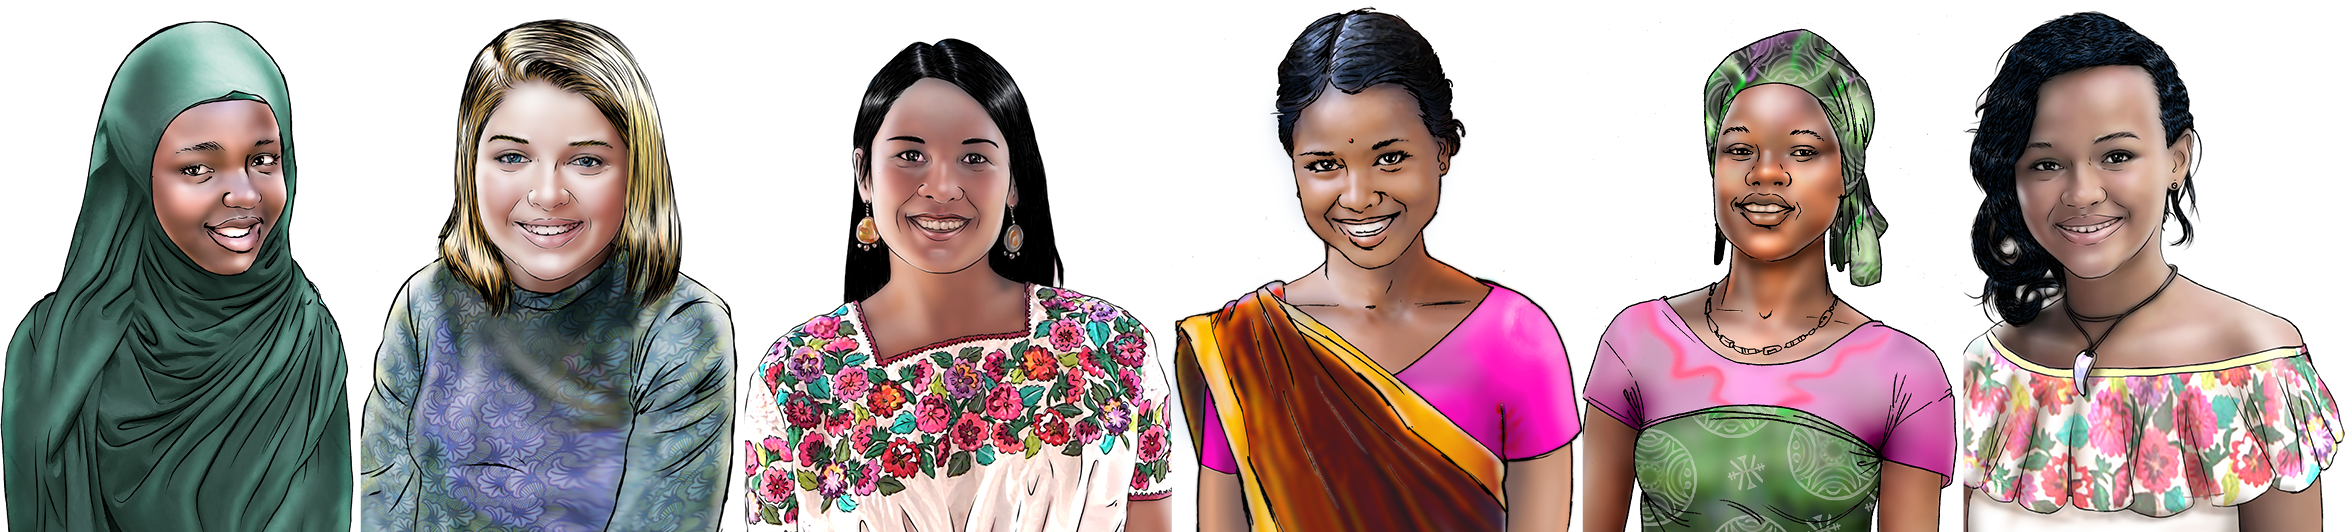 Illustration of smiling adolescent girls in a row. 